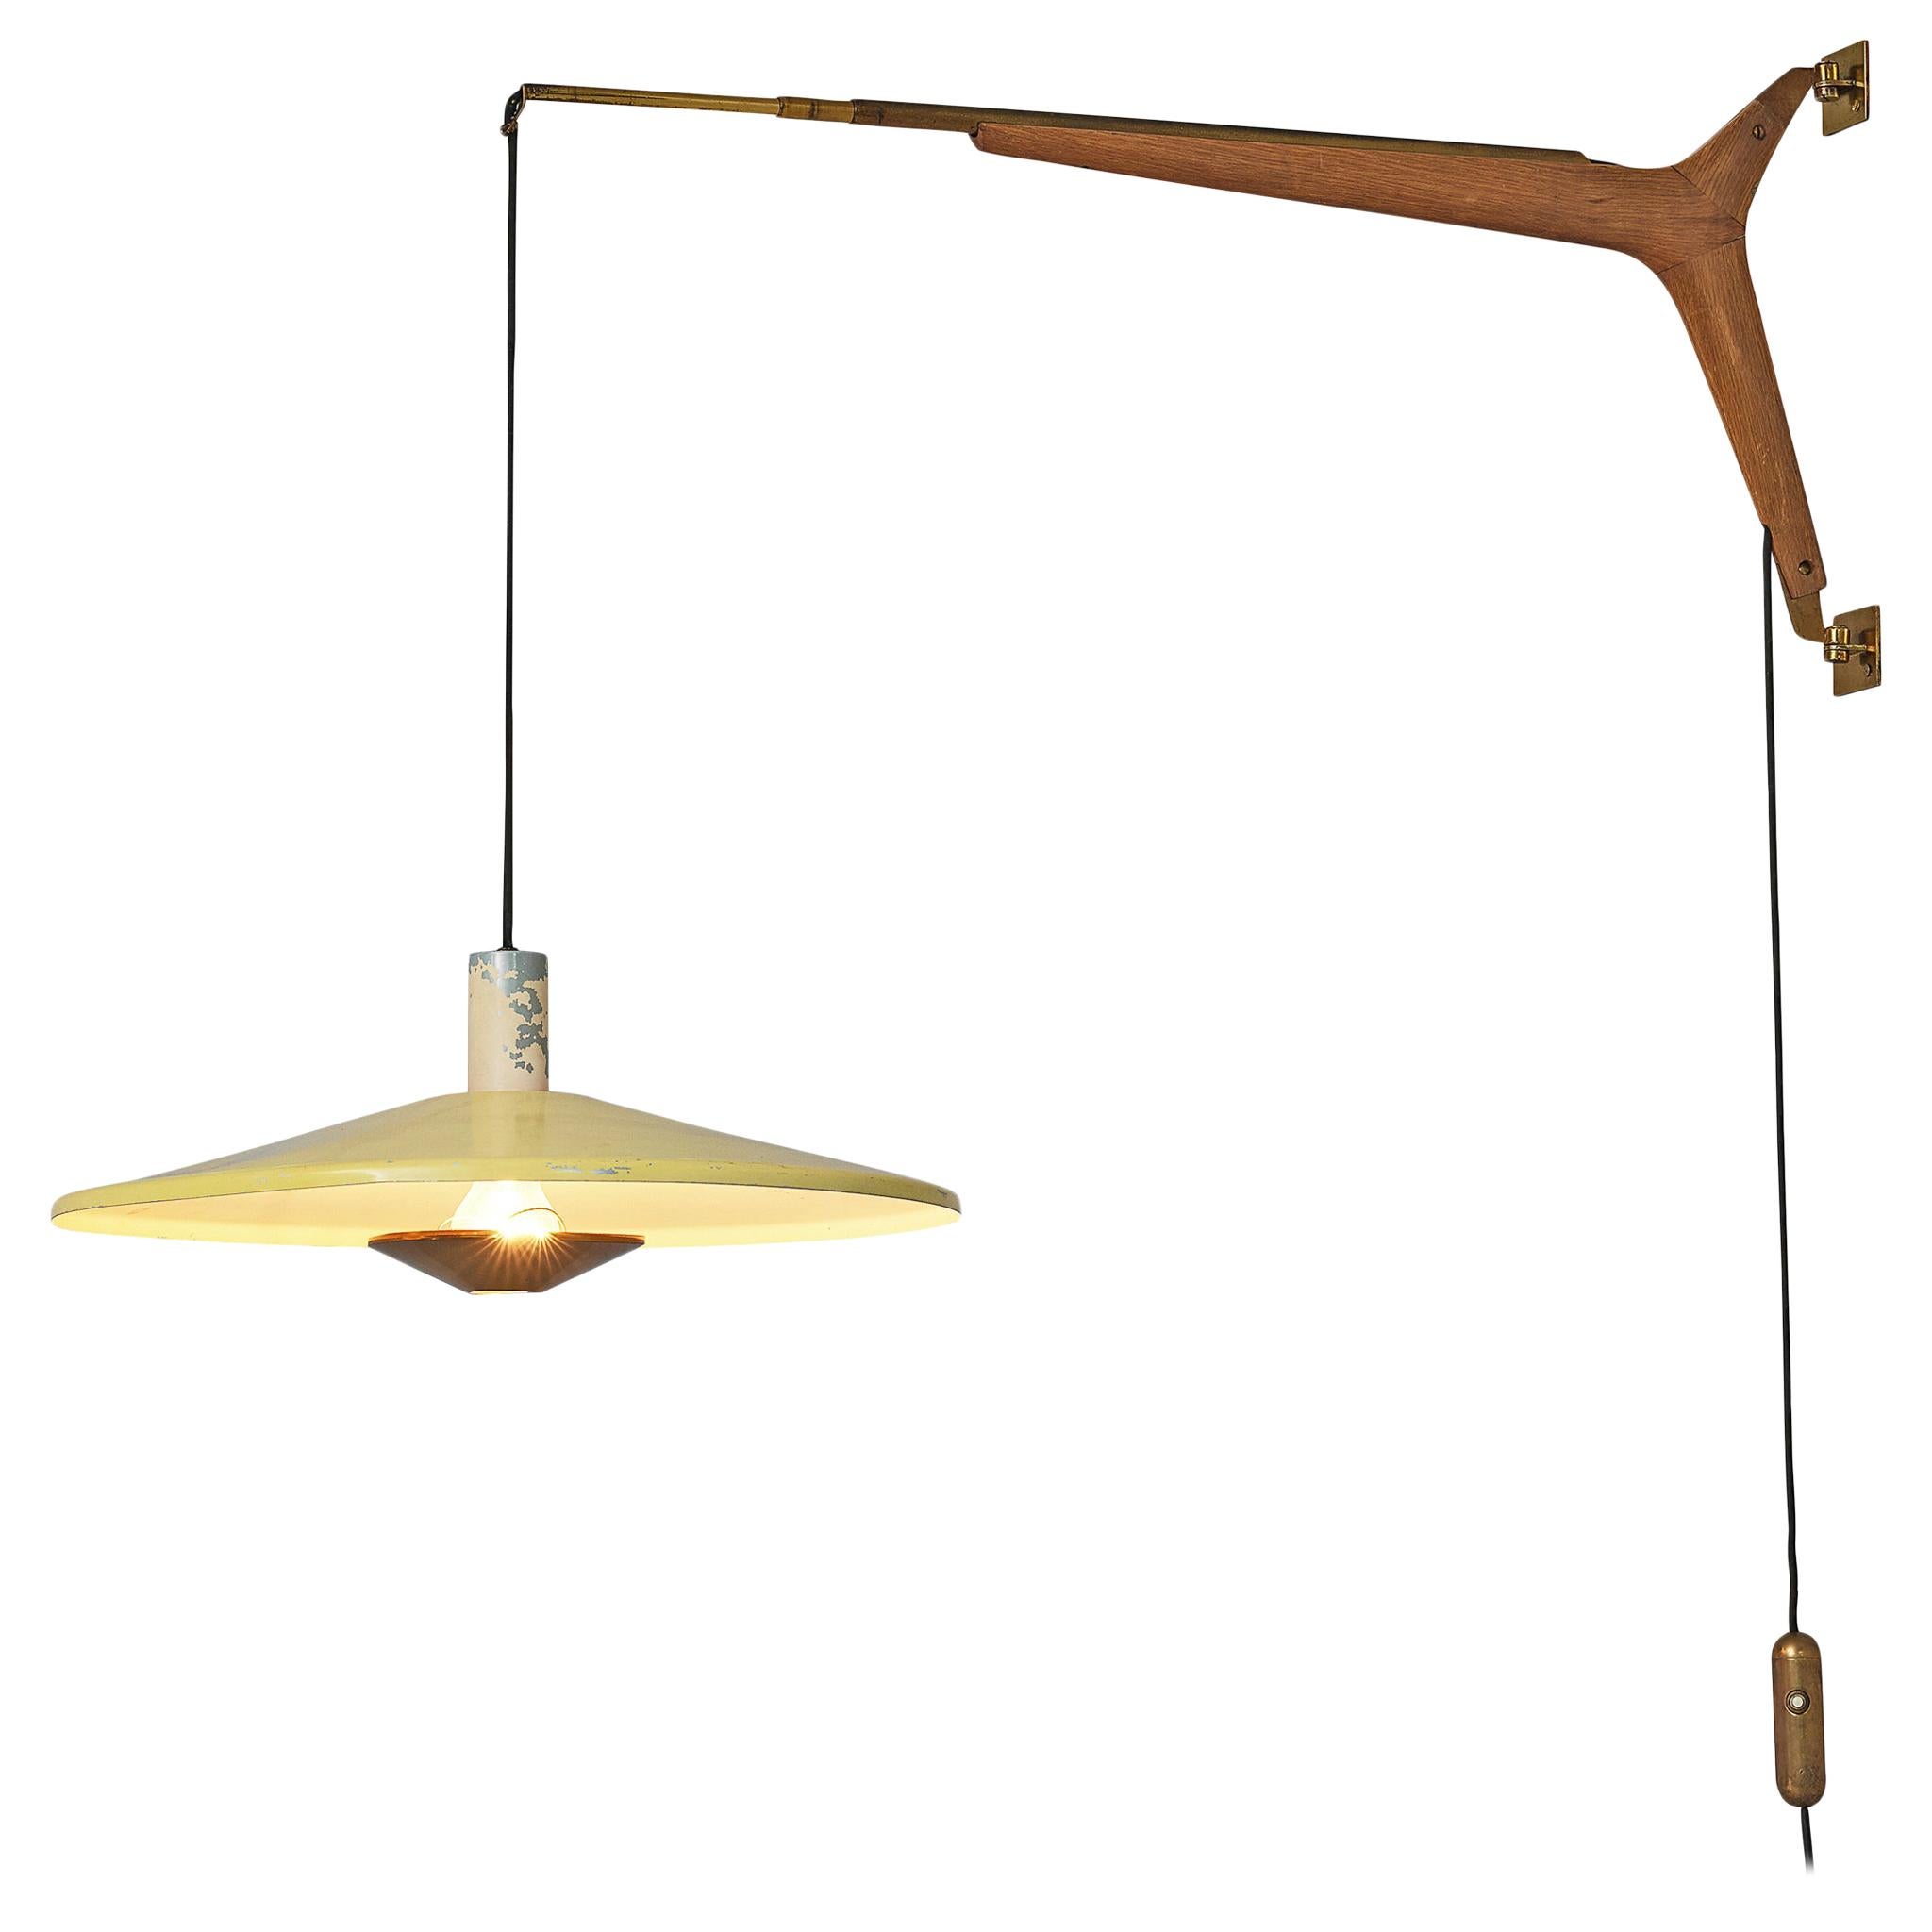 Italian Wall-Mounted Pendant Lamp with Brass and Wood